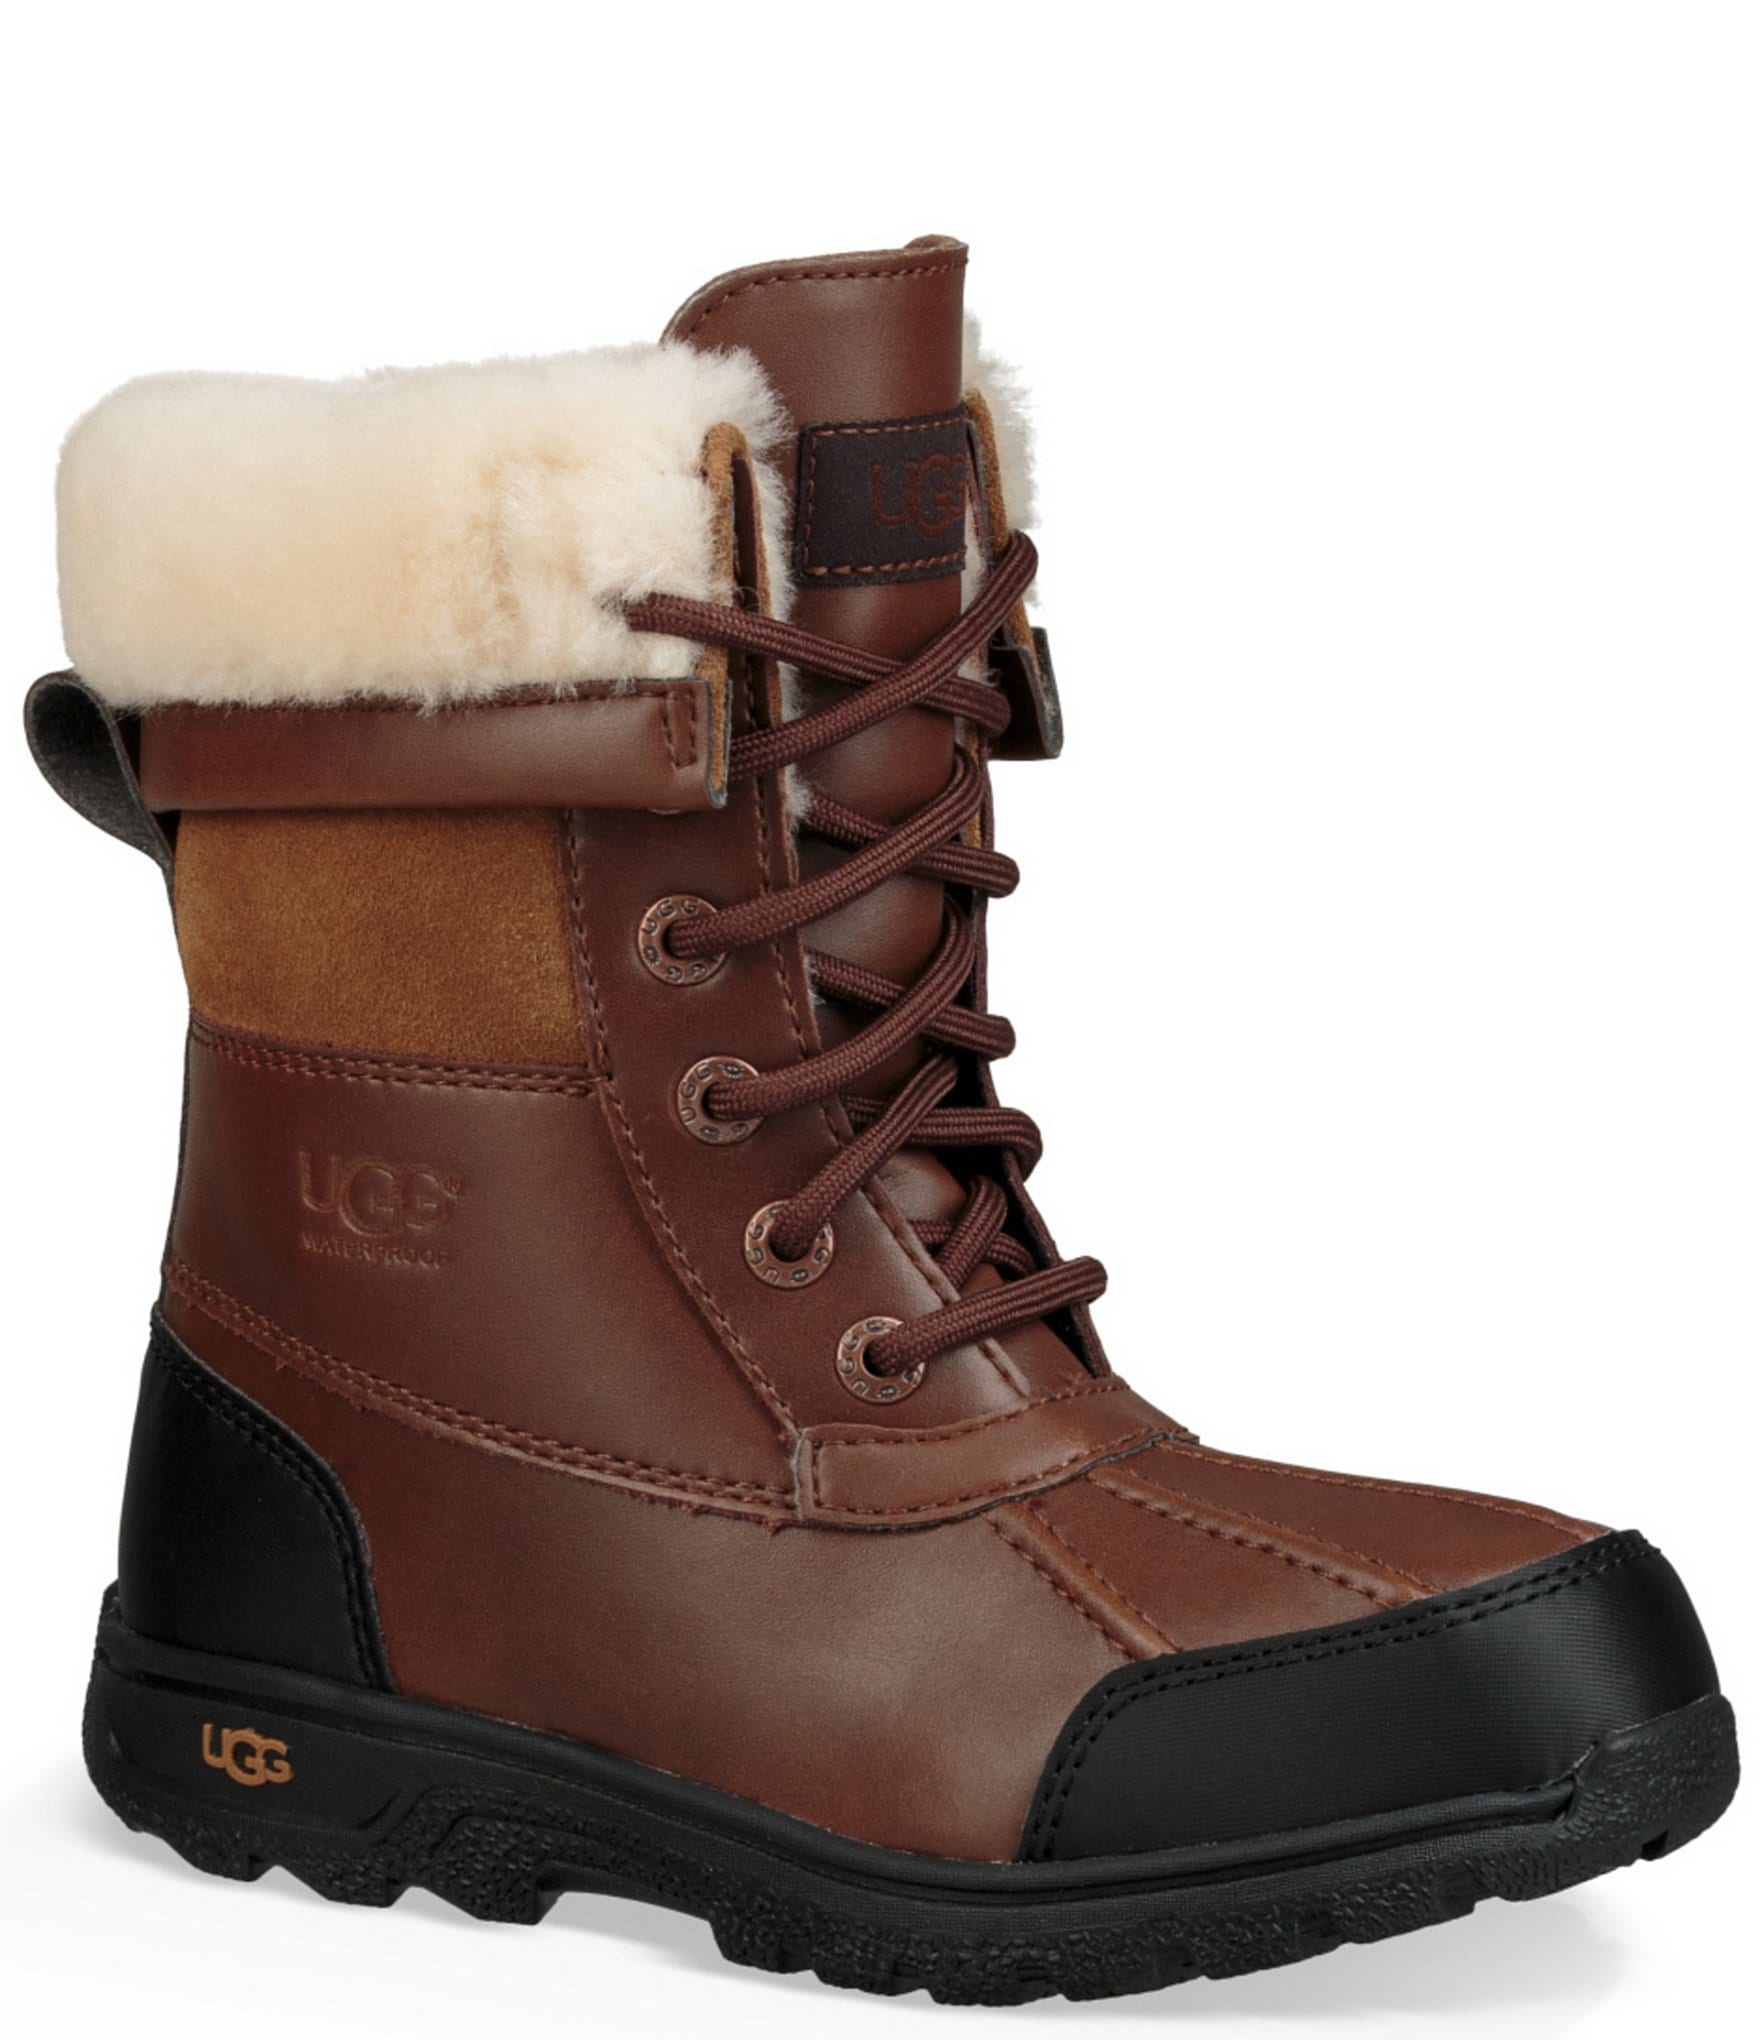 UGG Boots, Shoes, Slippers, Accessories 